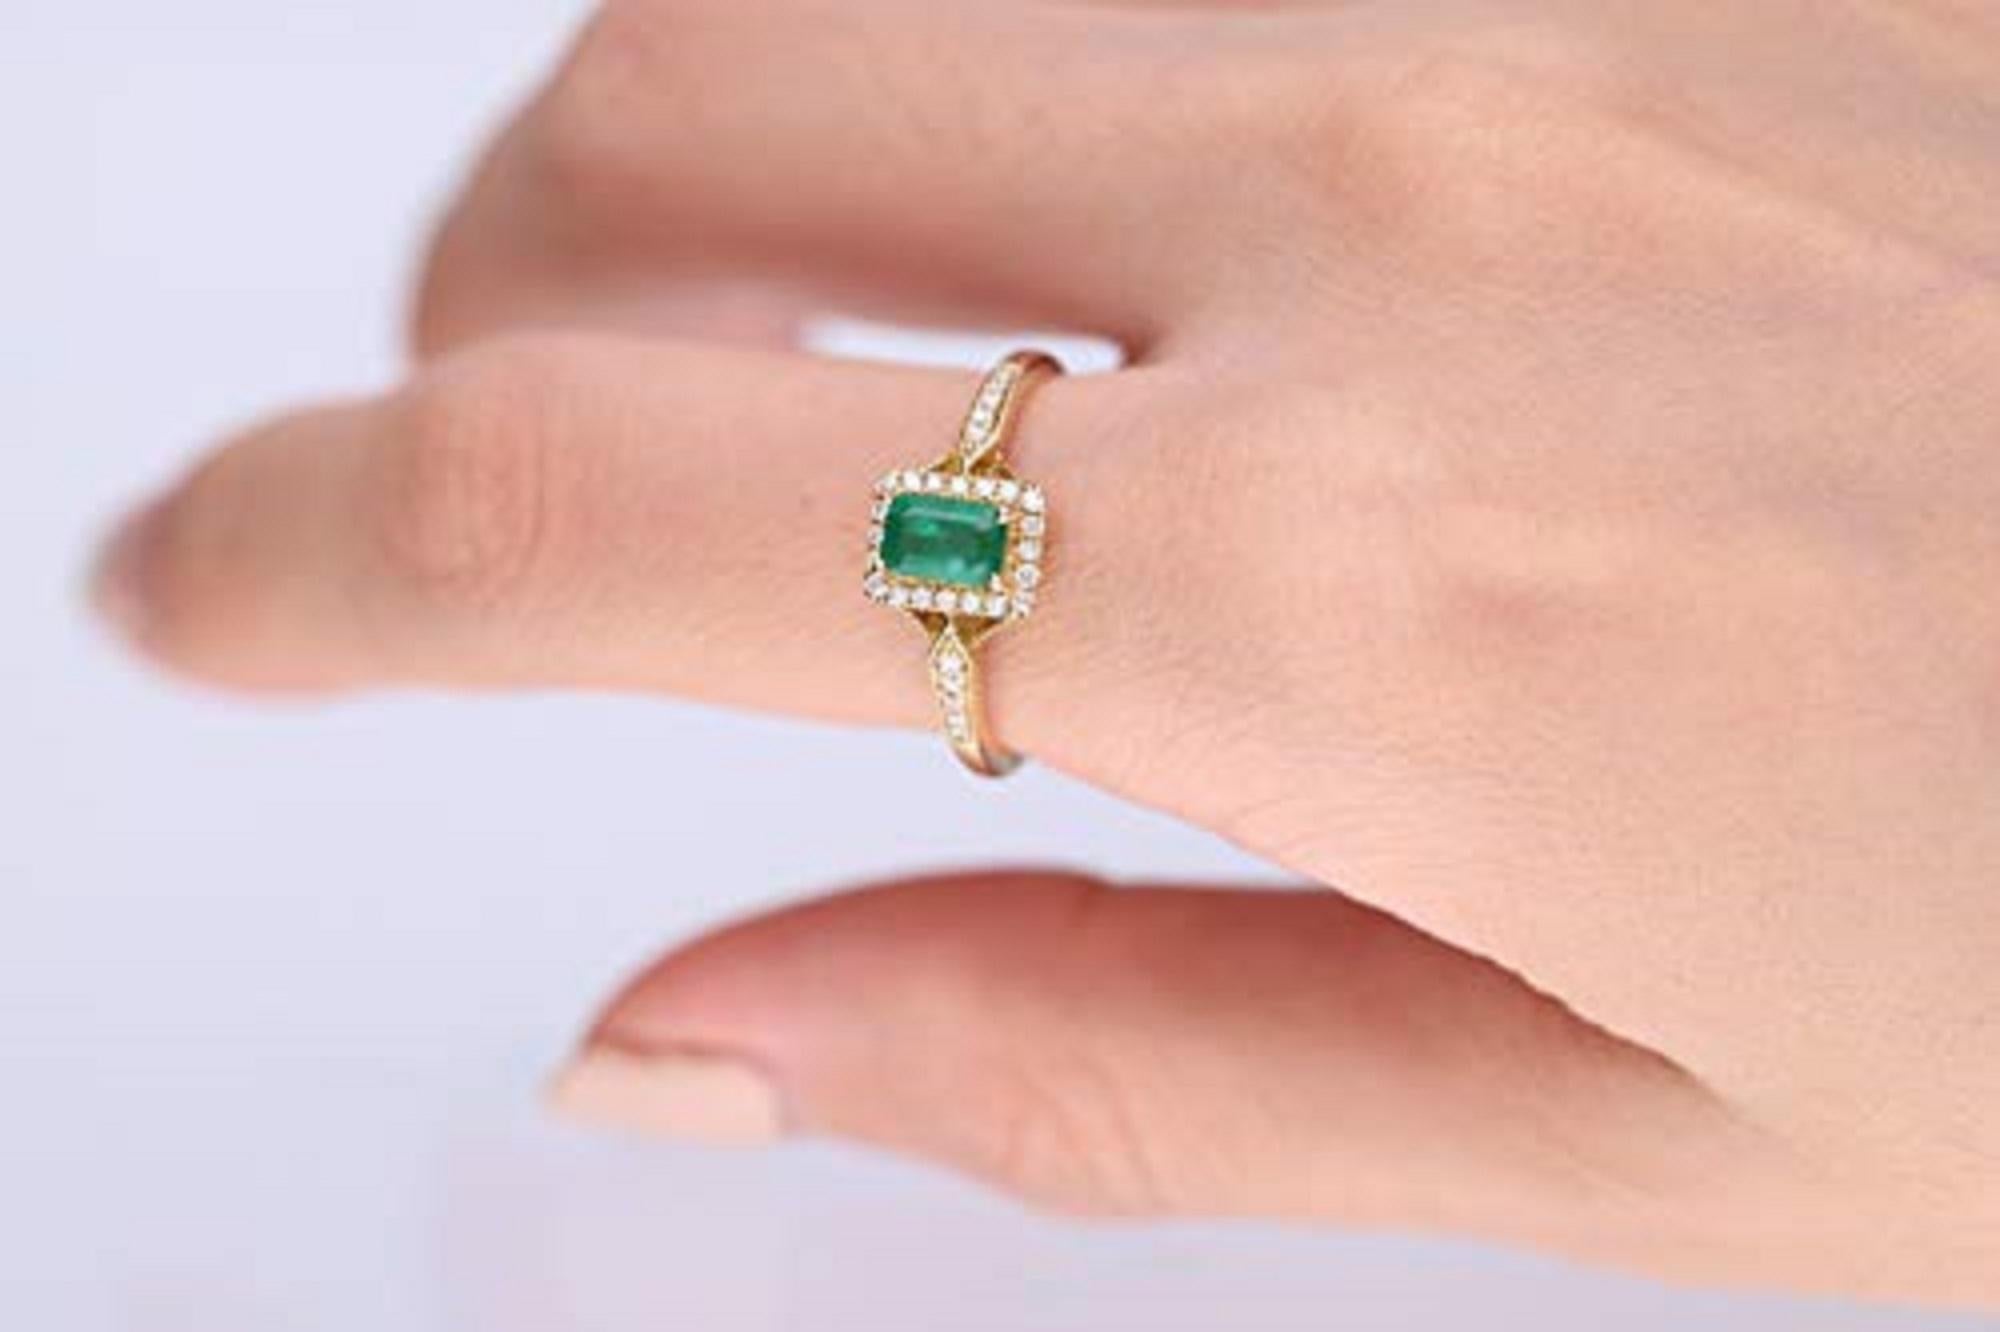 Stunning, timeless and classy eternity Unique Ring. Decorate yourself in luxury with this Gin & Grace Ring. The 10K Yellow Gold jewelry boasts Emerald-Cut Prong Setting Natural Emerald (1 pc) 0.53 Carat, along with Natural Round cut white Diamond